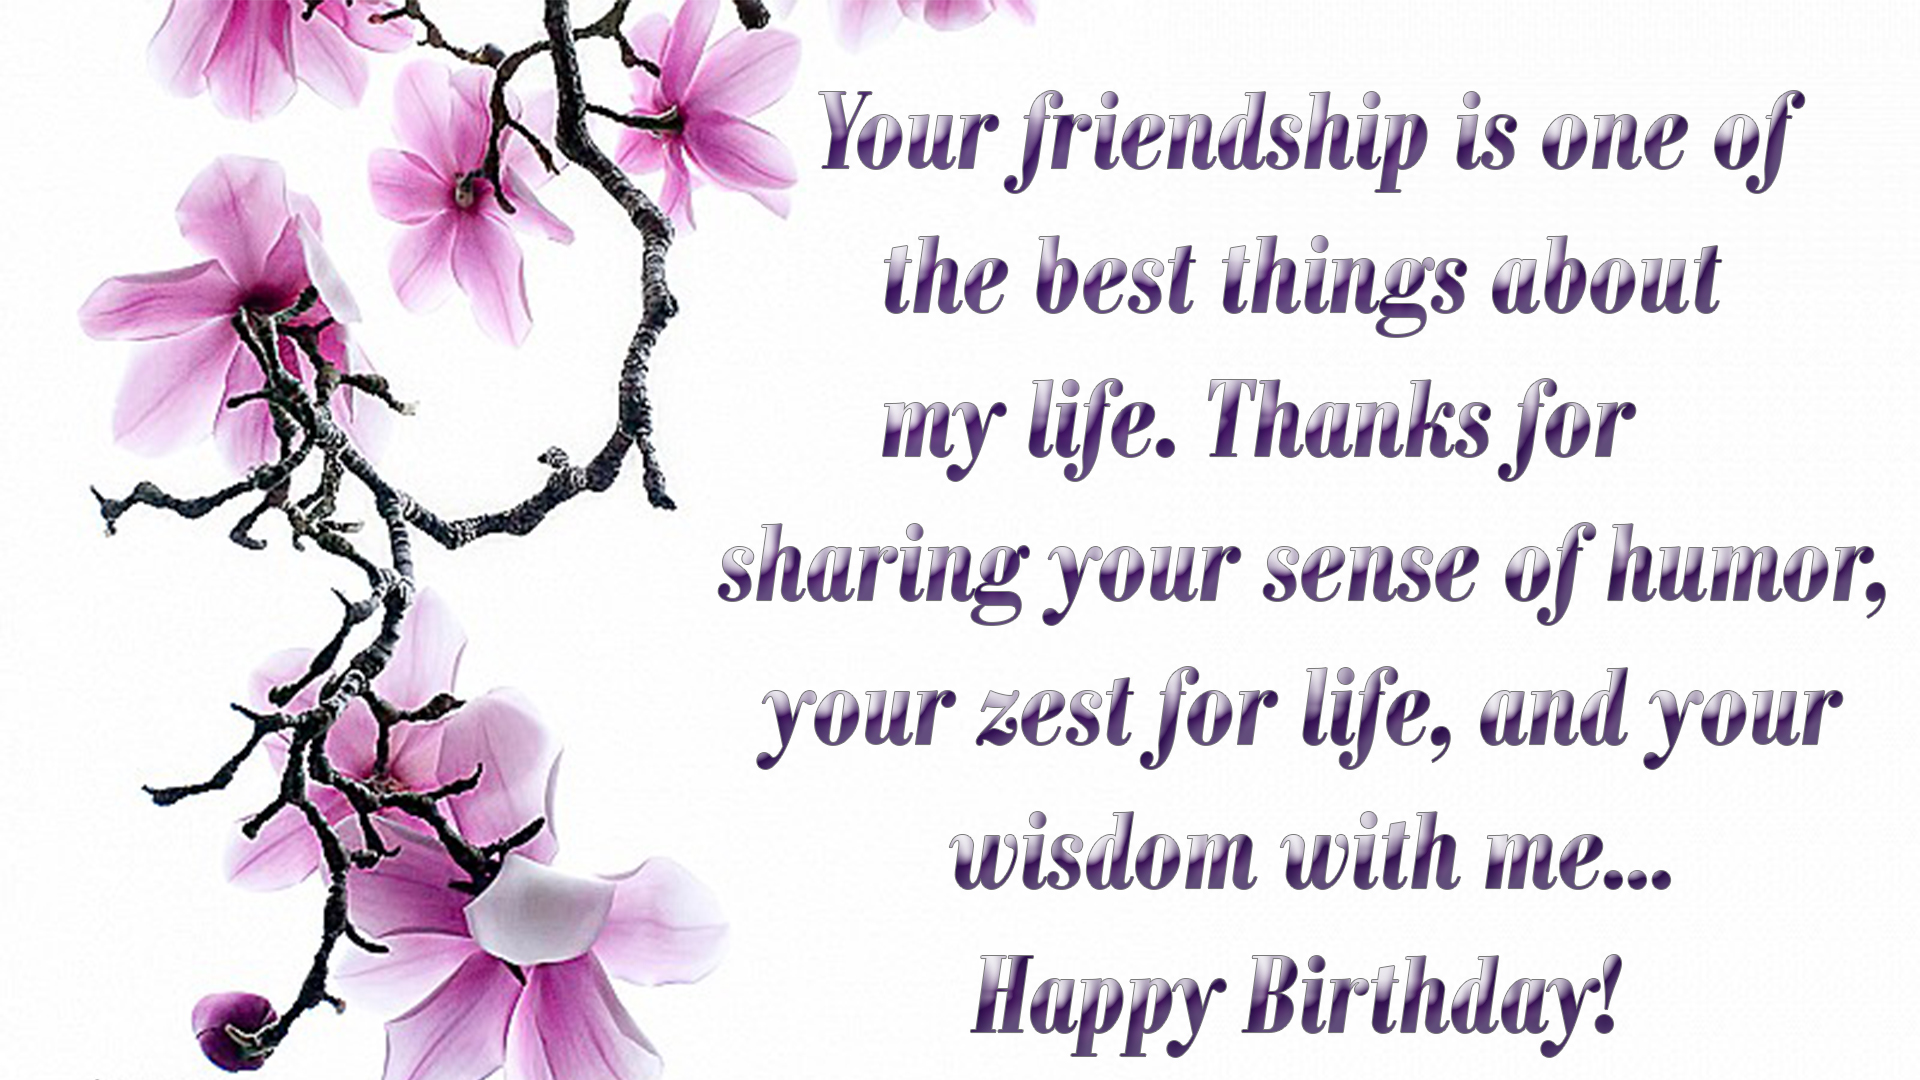 lovely bday quotes 2018 image